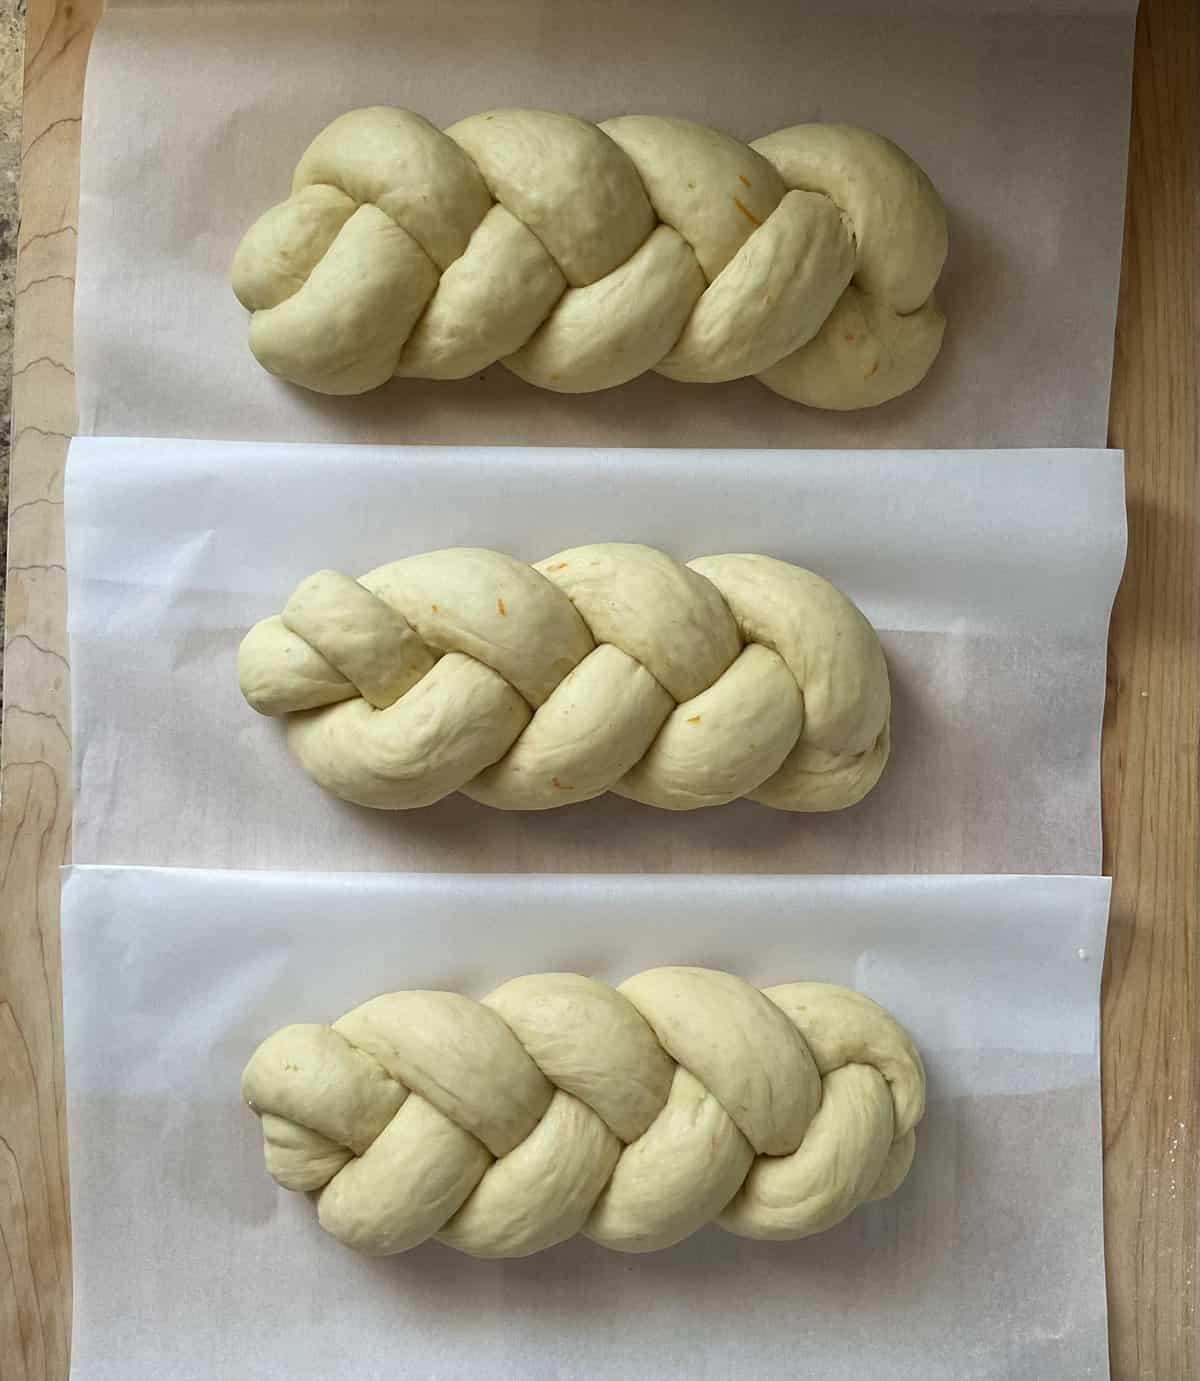 Three braided loaves of Easter bread on a parchment lined baking sheet.